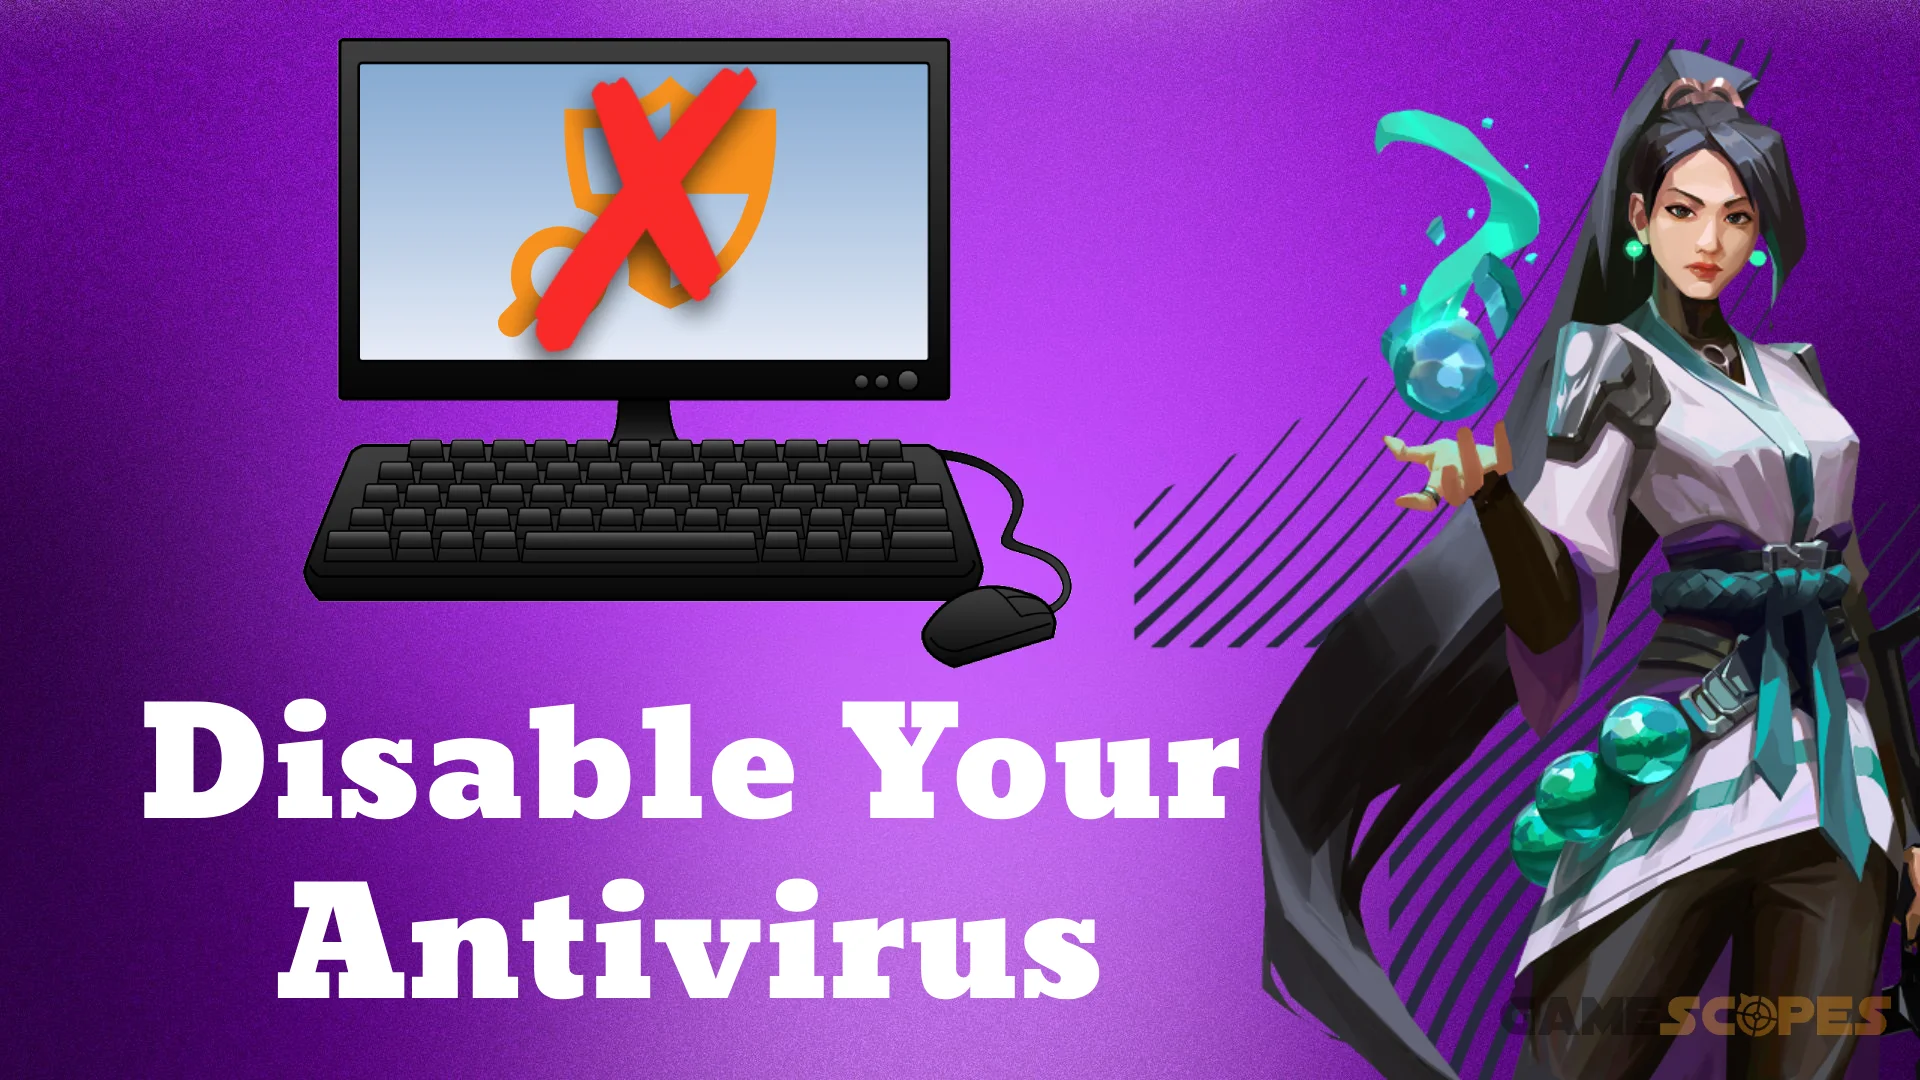 When your Valorant keeps crashing on startup, you'll need to disable the antivirus.